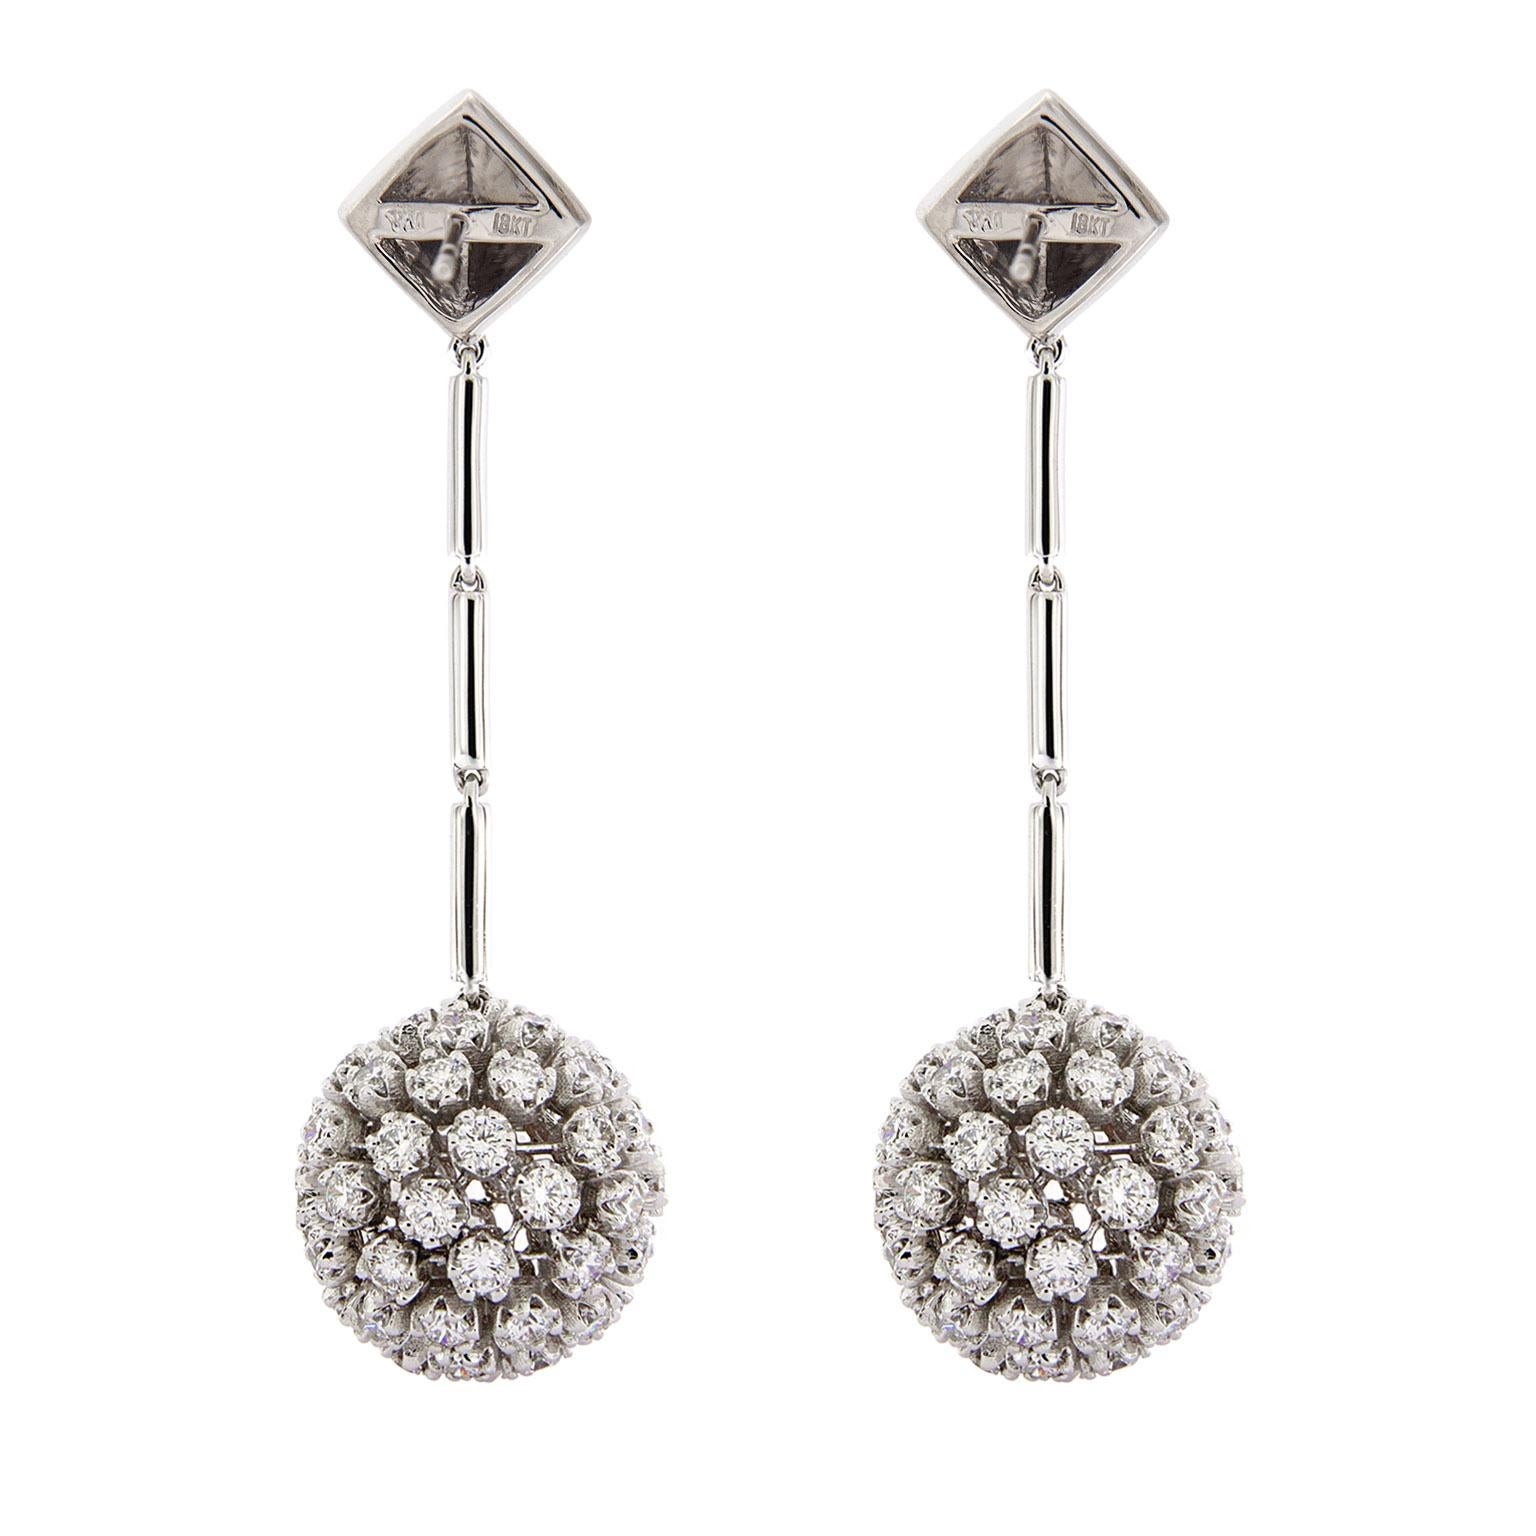 These earrings play with monochrome. Their base is 18kt white gold, with round brilliant cut diamonds for glitter. At the top are pyramids, at the bottom are diamond balls and gold links connect the two. There are 122 diamonds at 8.71 ctw. 